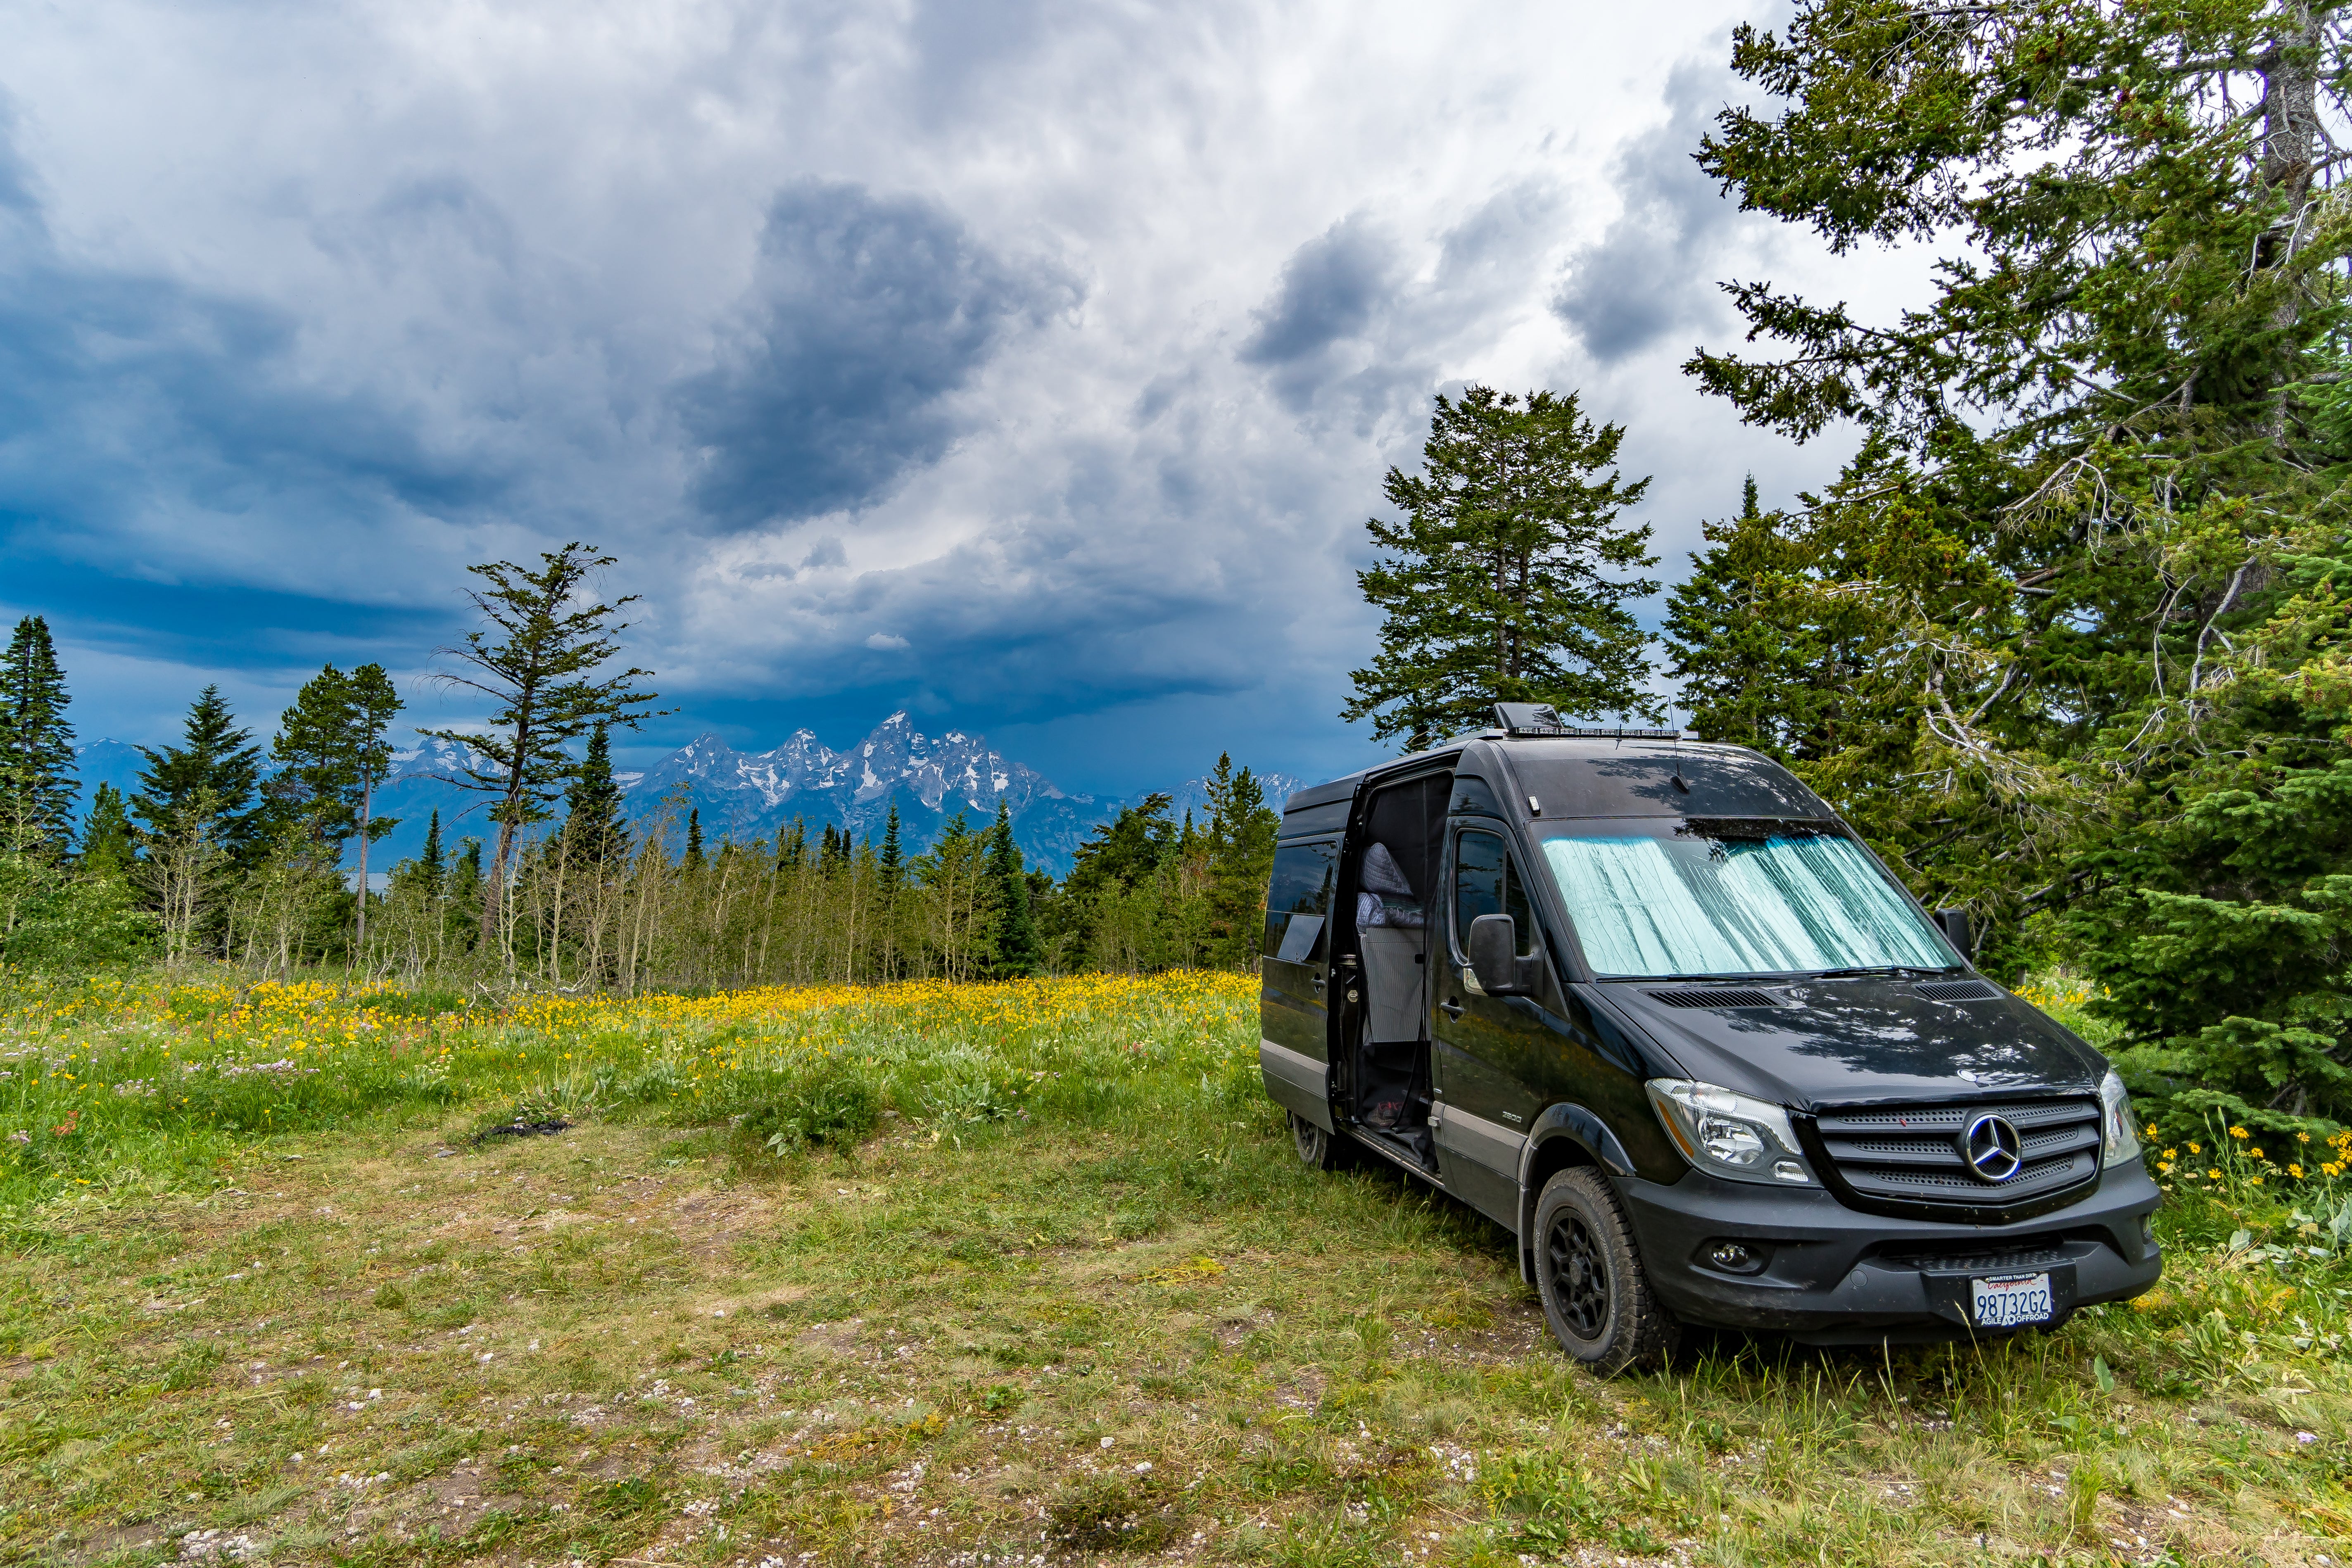 Storm coming in over the Tetons.